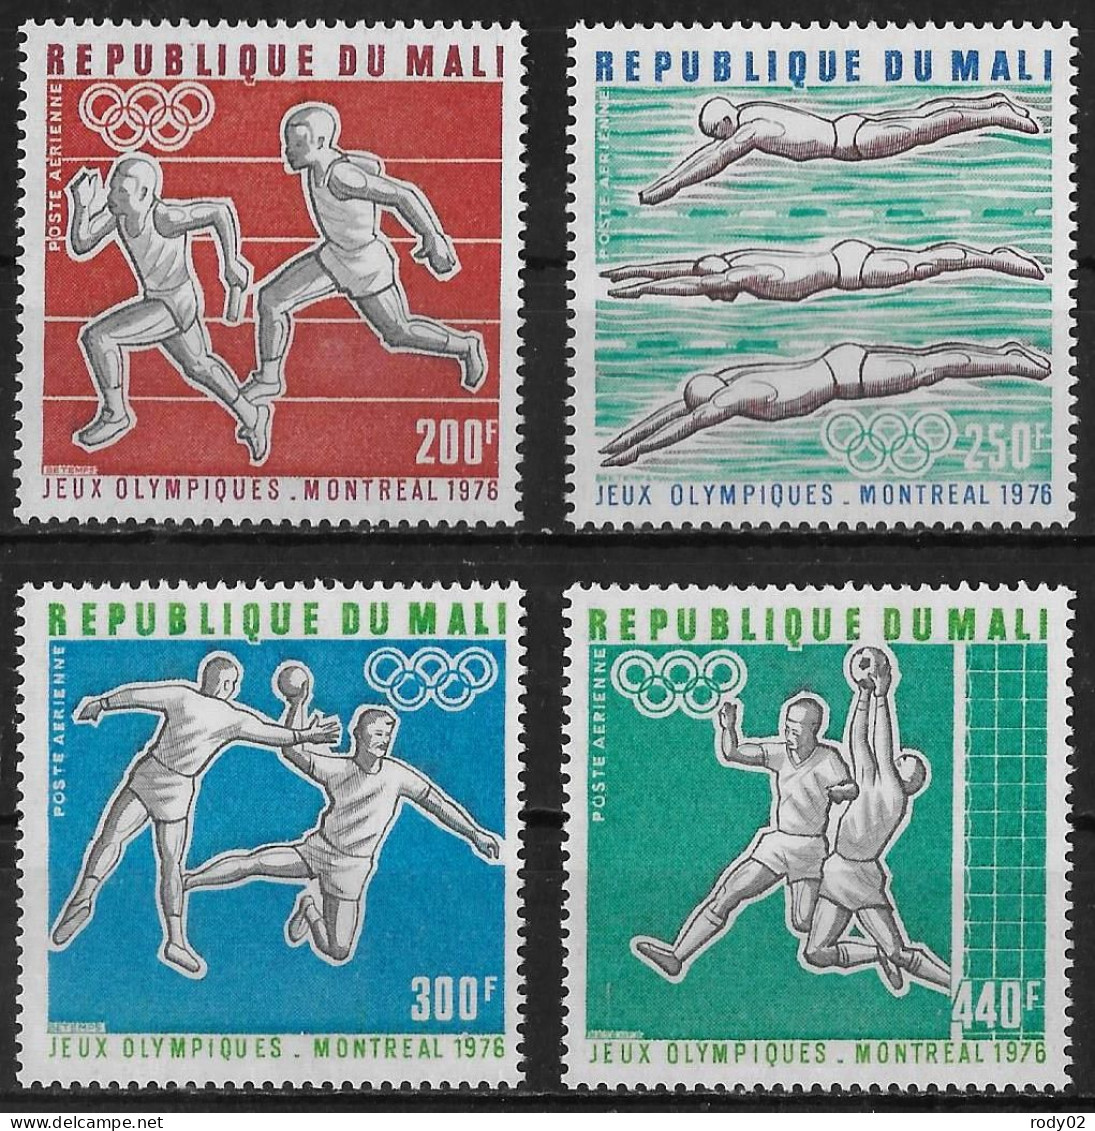 MALI - JEUX OLYMPIQUES DE MONTREAL EN 1976 - PA 276 A 279 - NEUF** MNH - Sommer 1976: Montreal